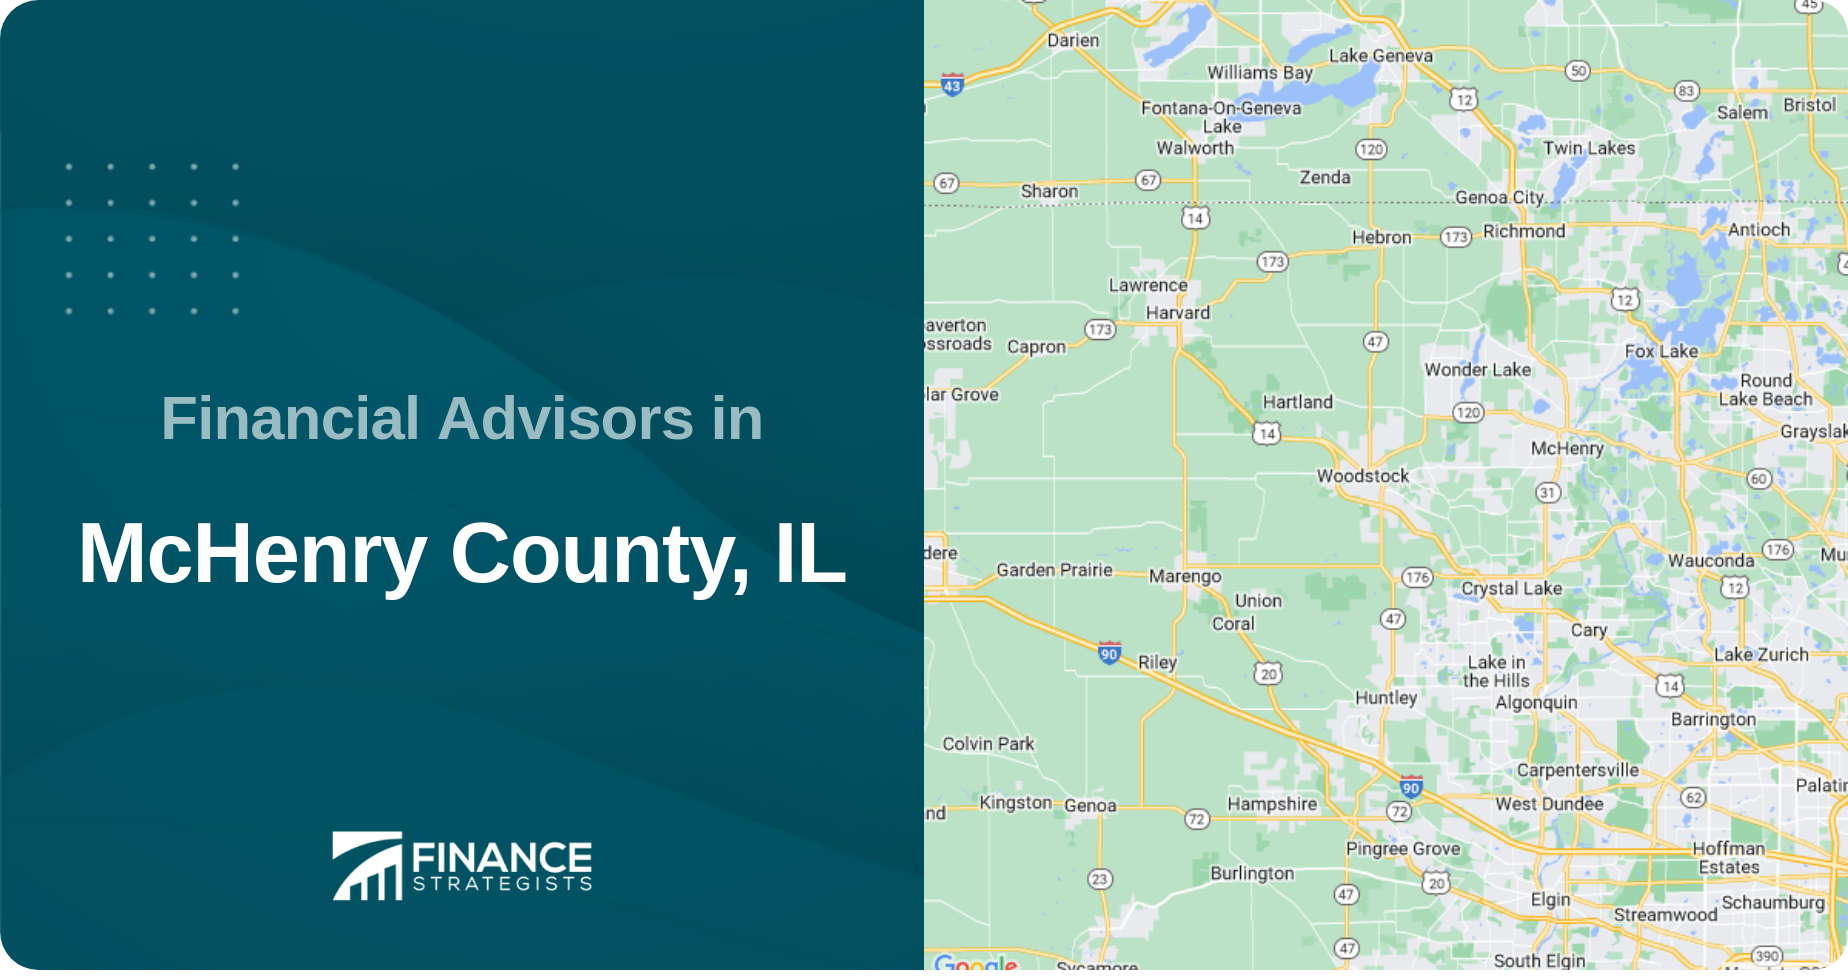 Financial Advisors in McHenry County, IL